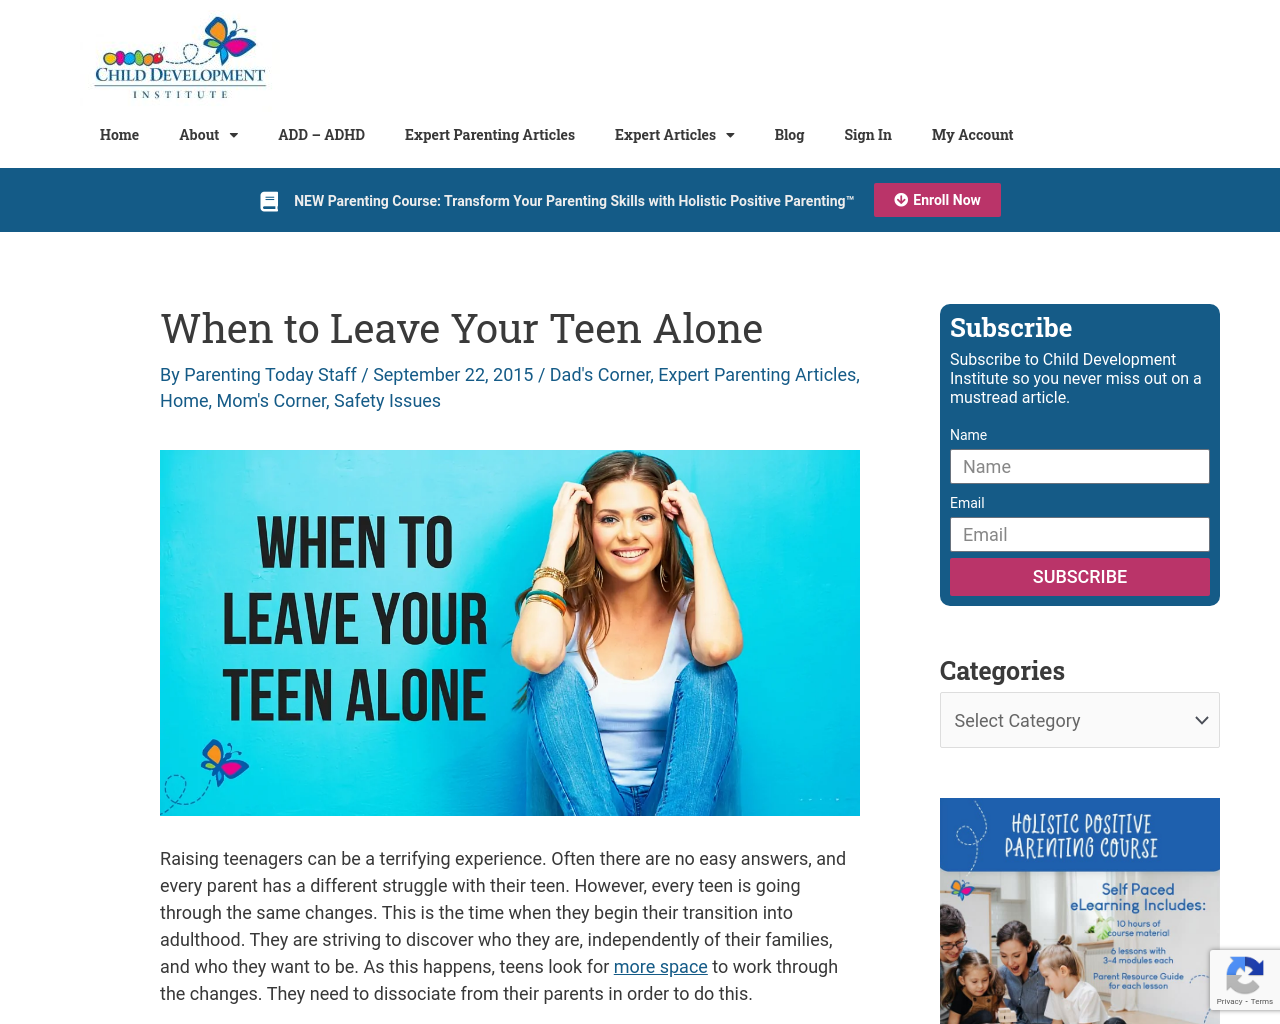 When to Leave Your Teen Alone